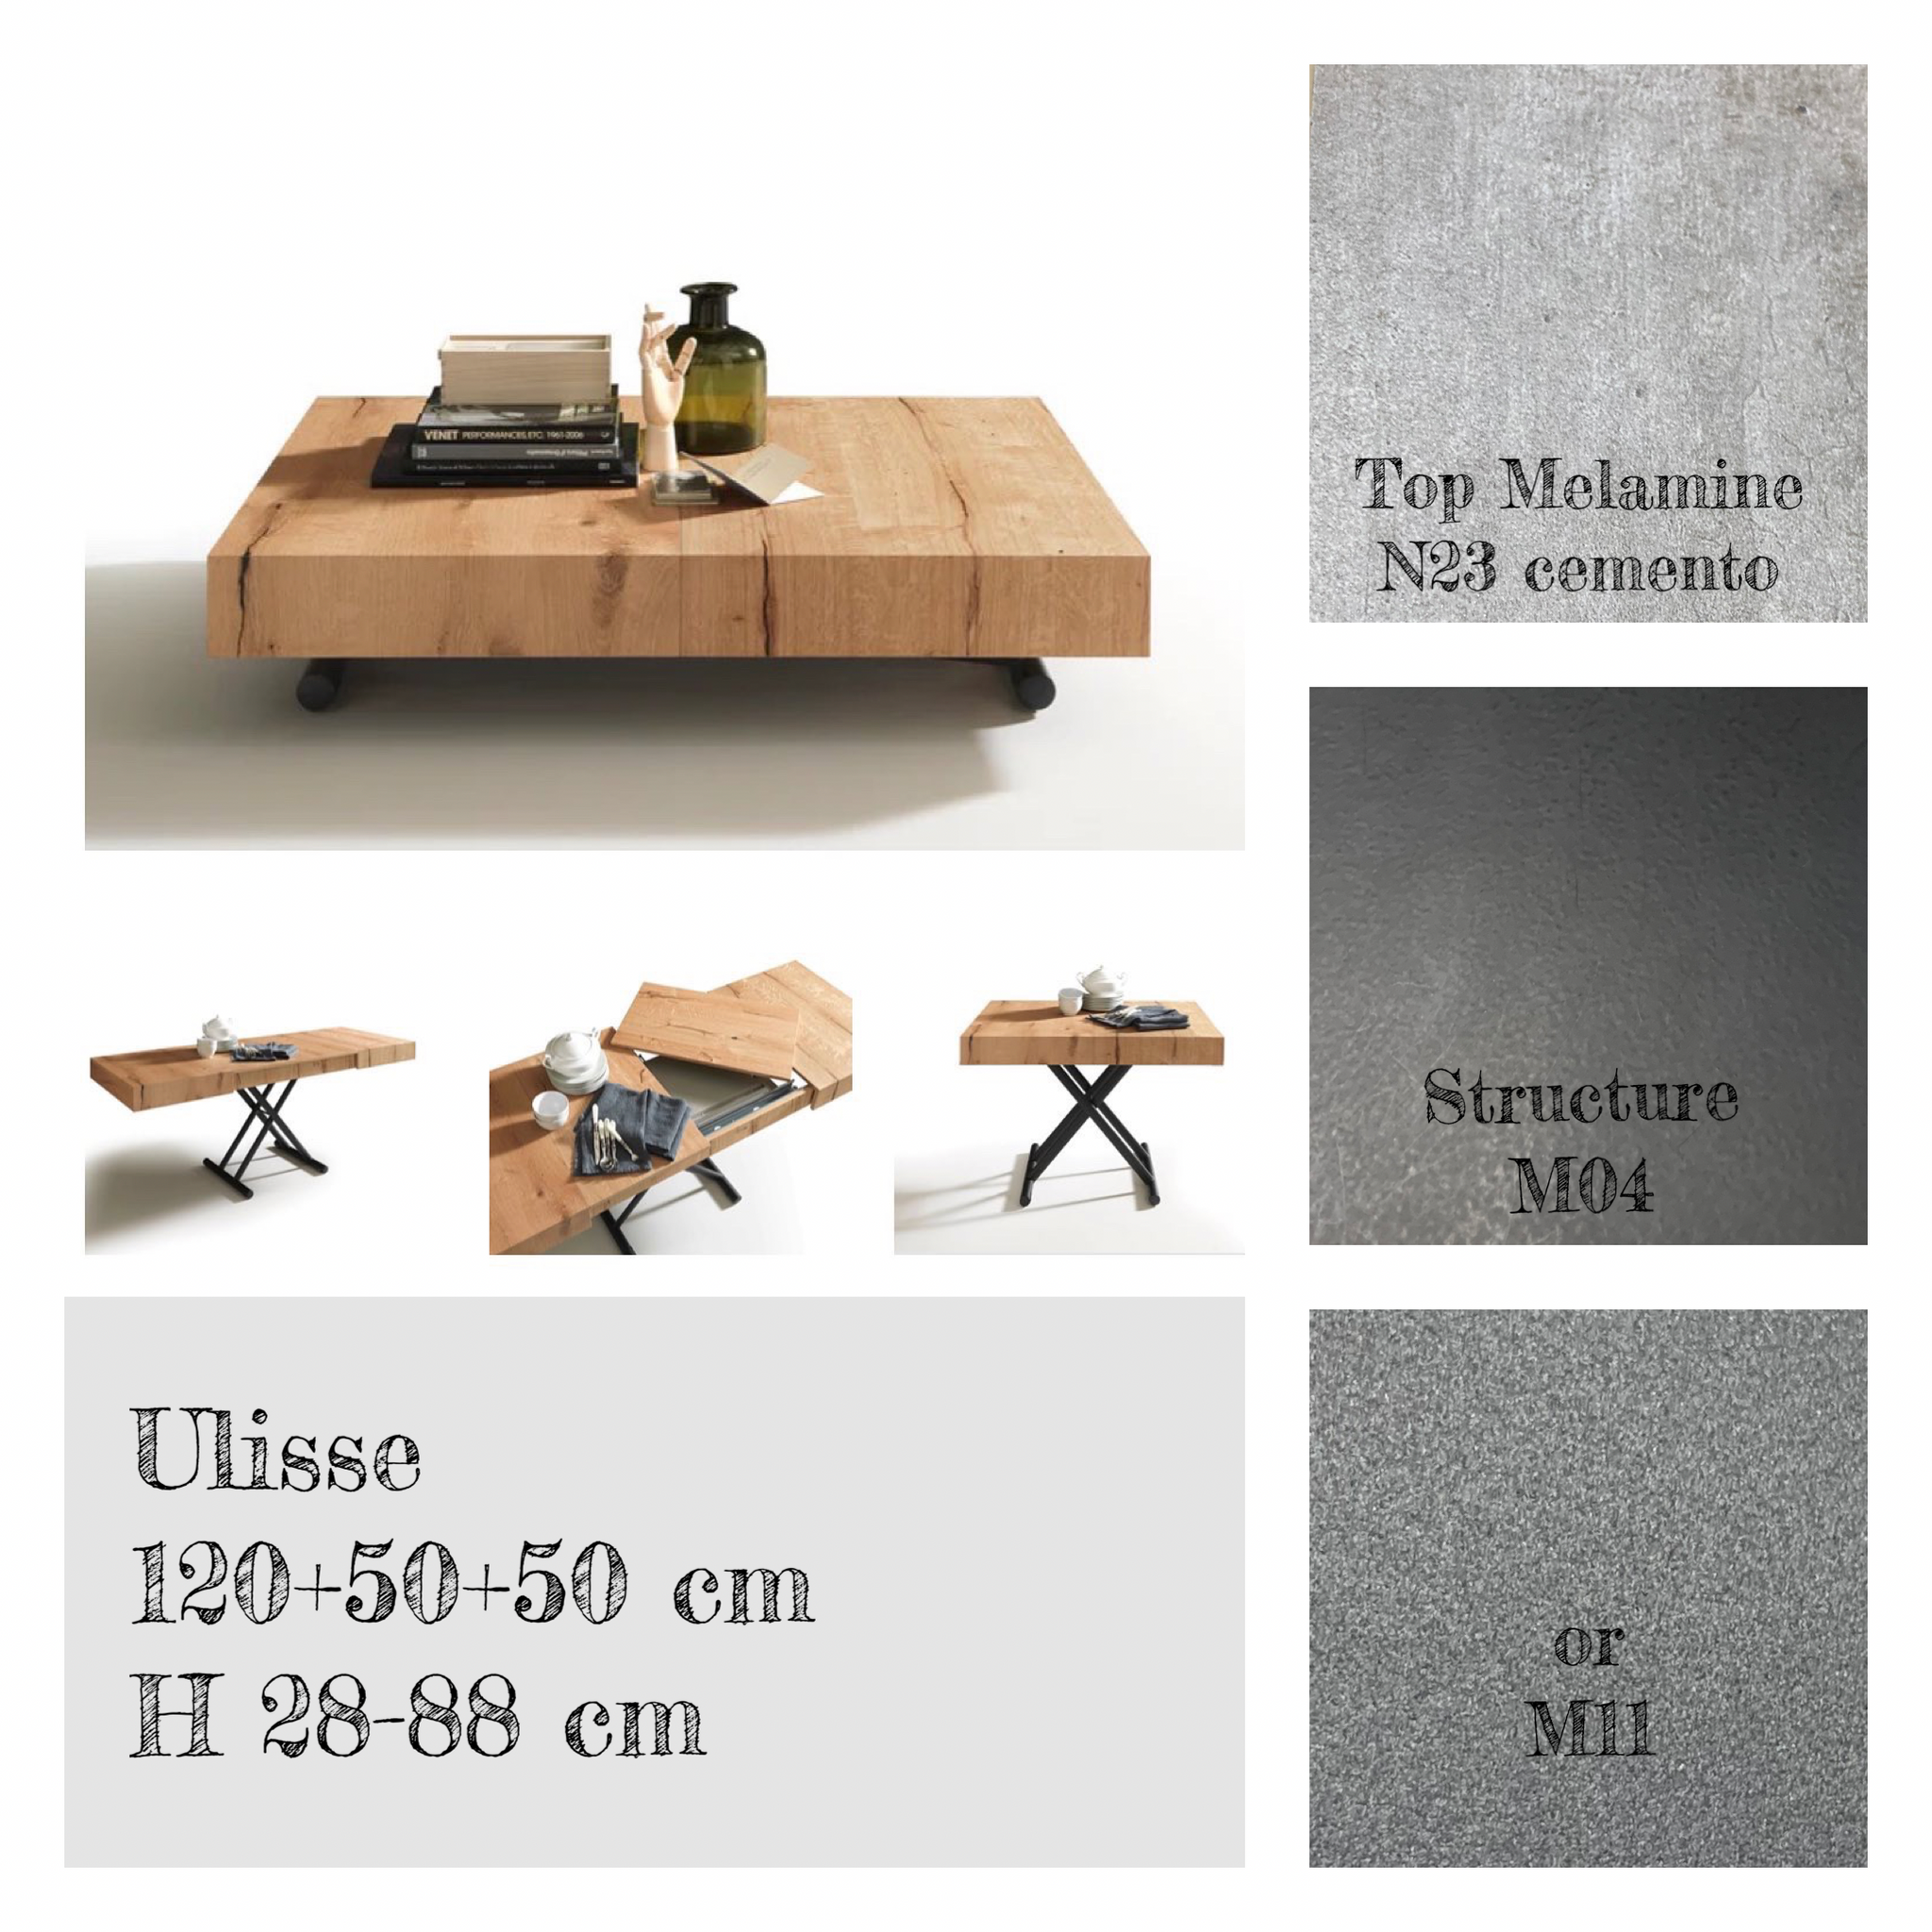 Promo offer Ulisse / Compact by Altacom Italia